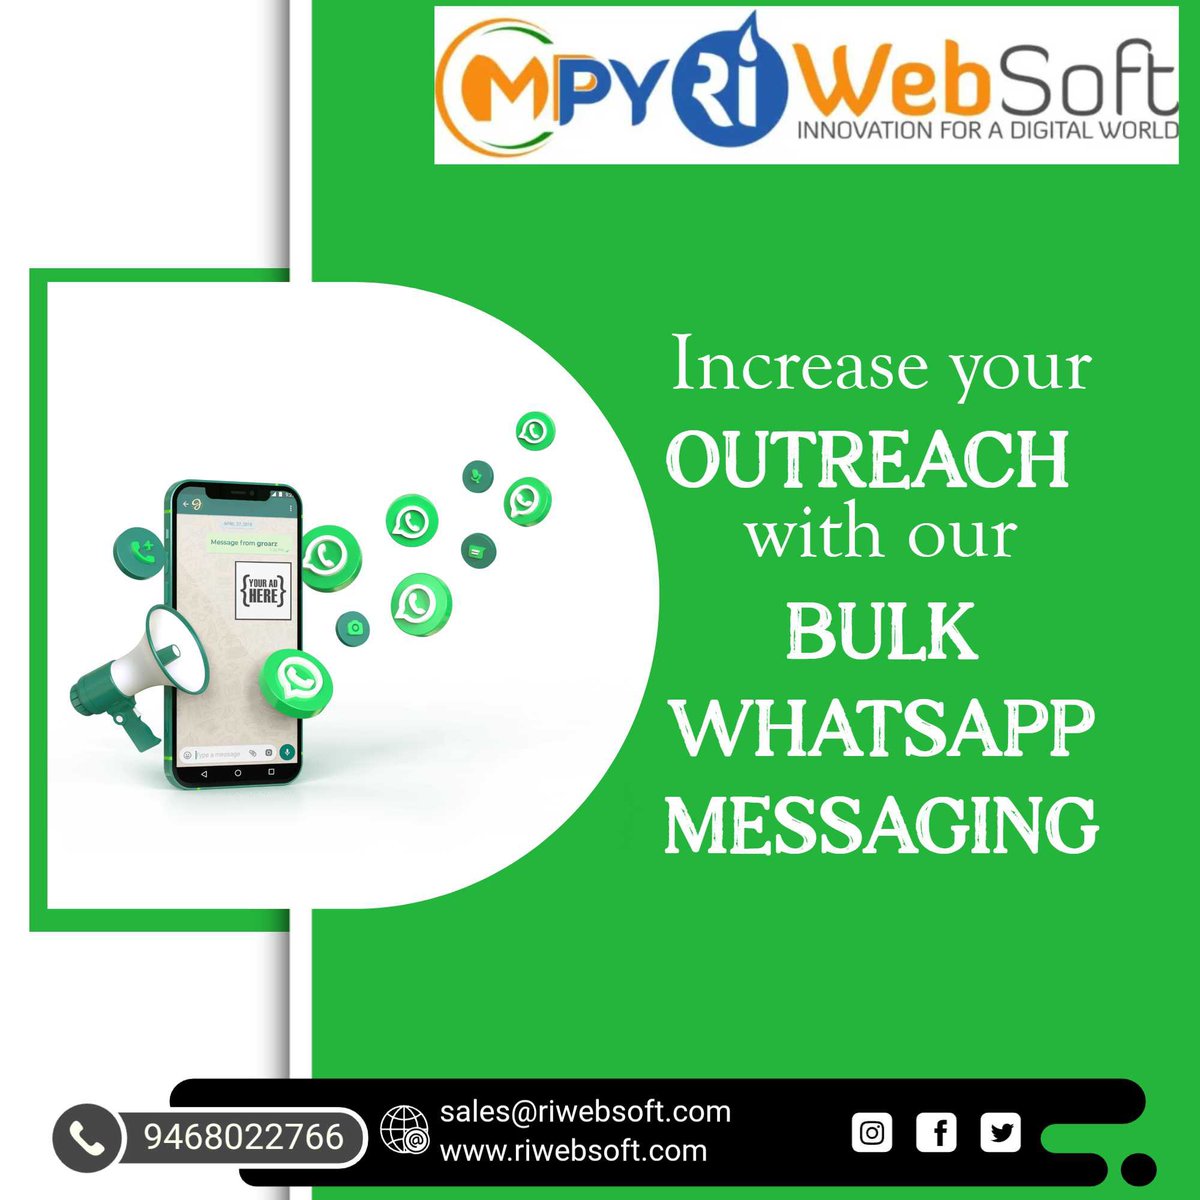 #whatsappsms #quickdelivery #bestservice #broadcast #instantreport #bulkmarketing

For more info..

📞 9468022666
       9053055566